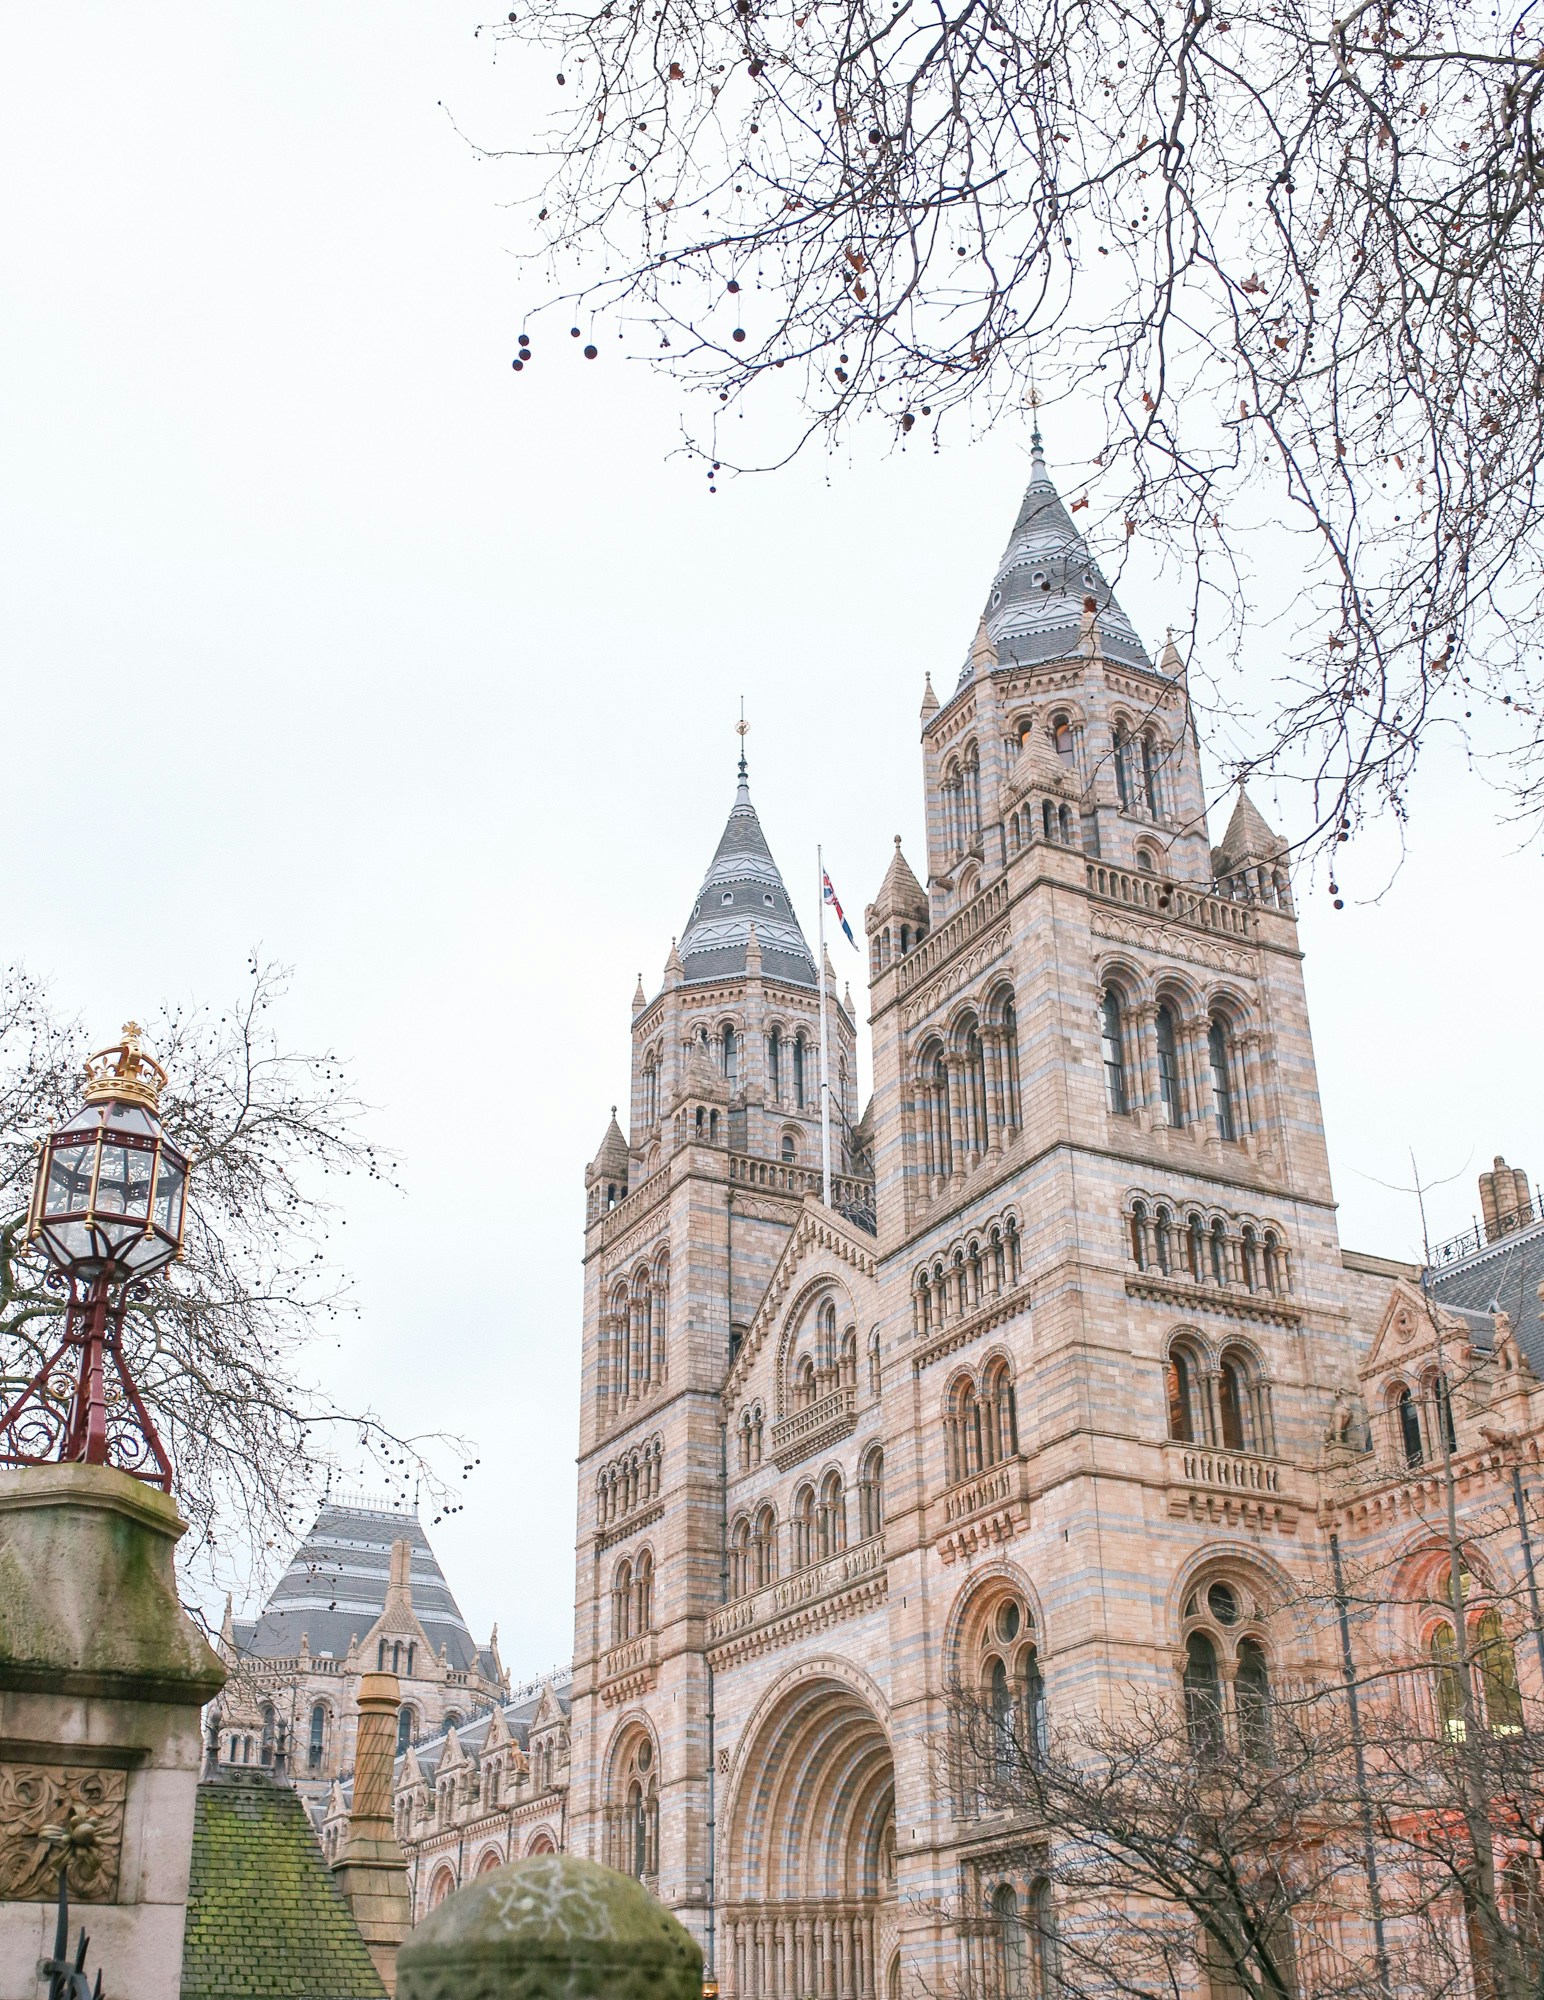 Natural History Museum, London is located on Cromwell Road and features an incredible collection.